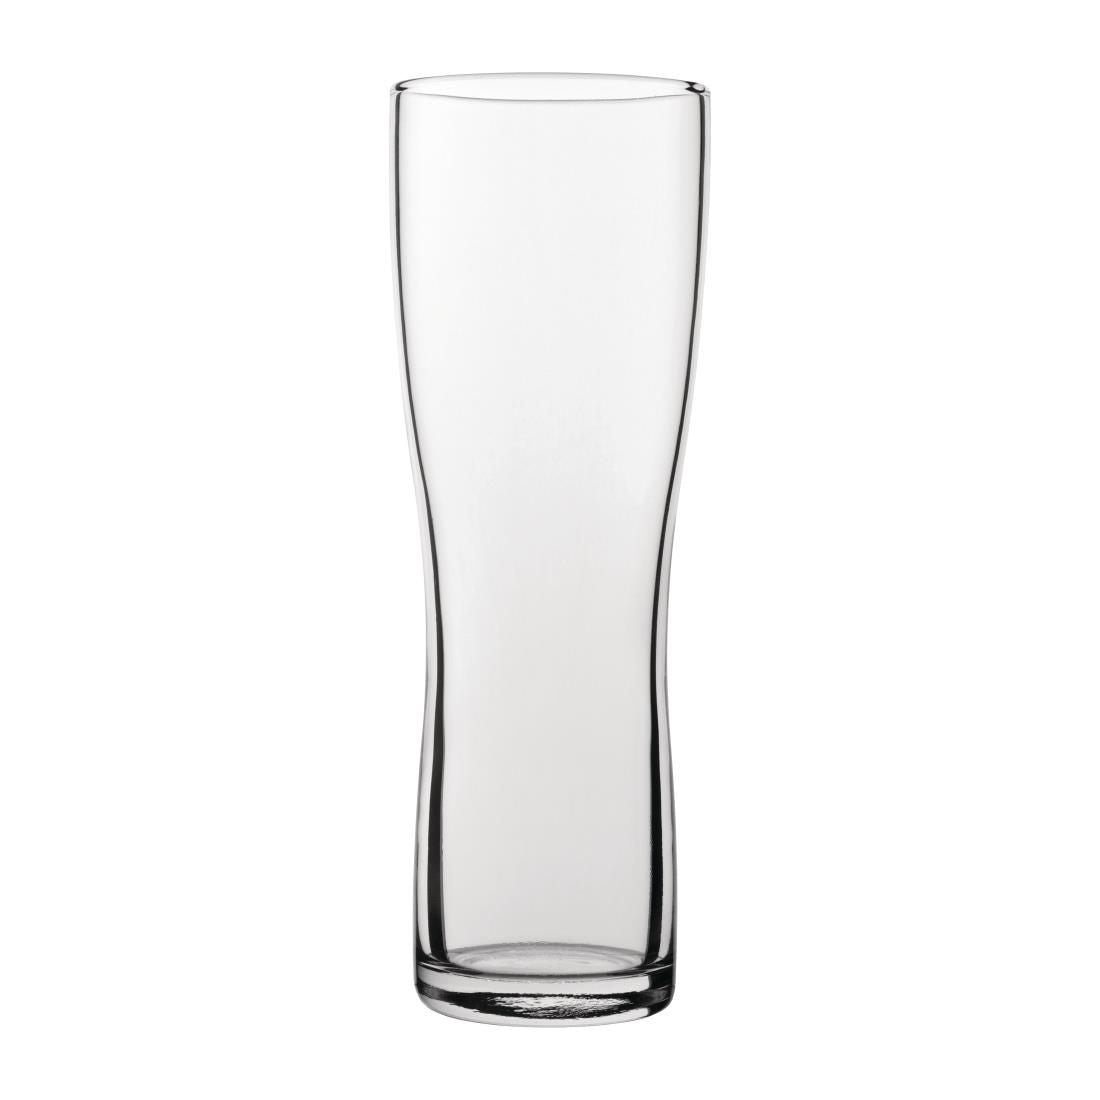 CY286 Utopia Aspen Nucleated Toughened Beer Glasses 570ml CE Marked (Pack of 24) JD Catering Equipment Solutions Ltd